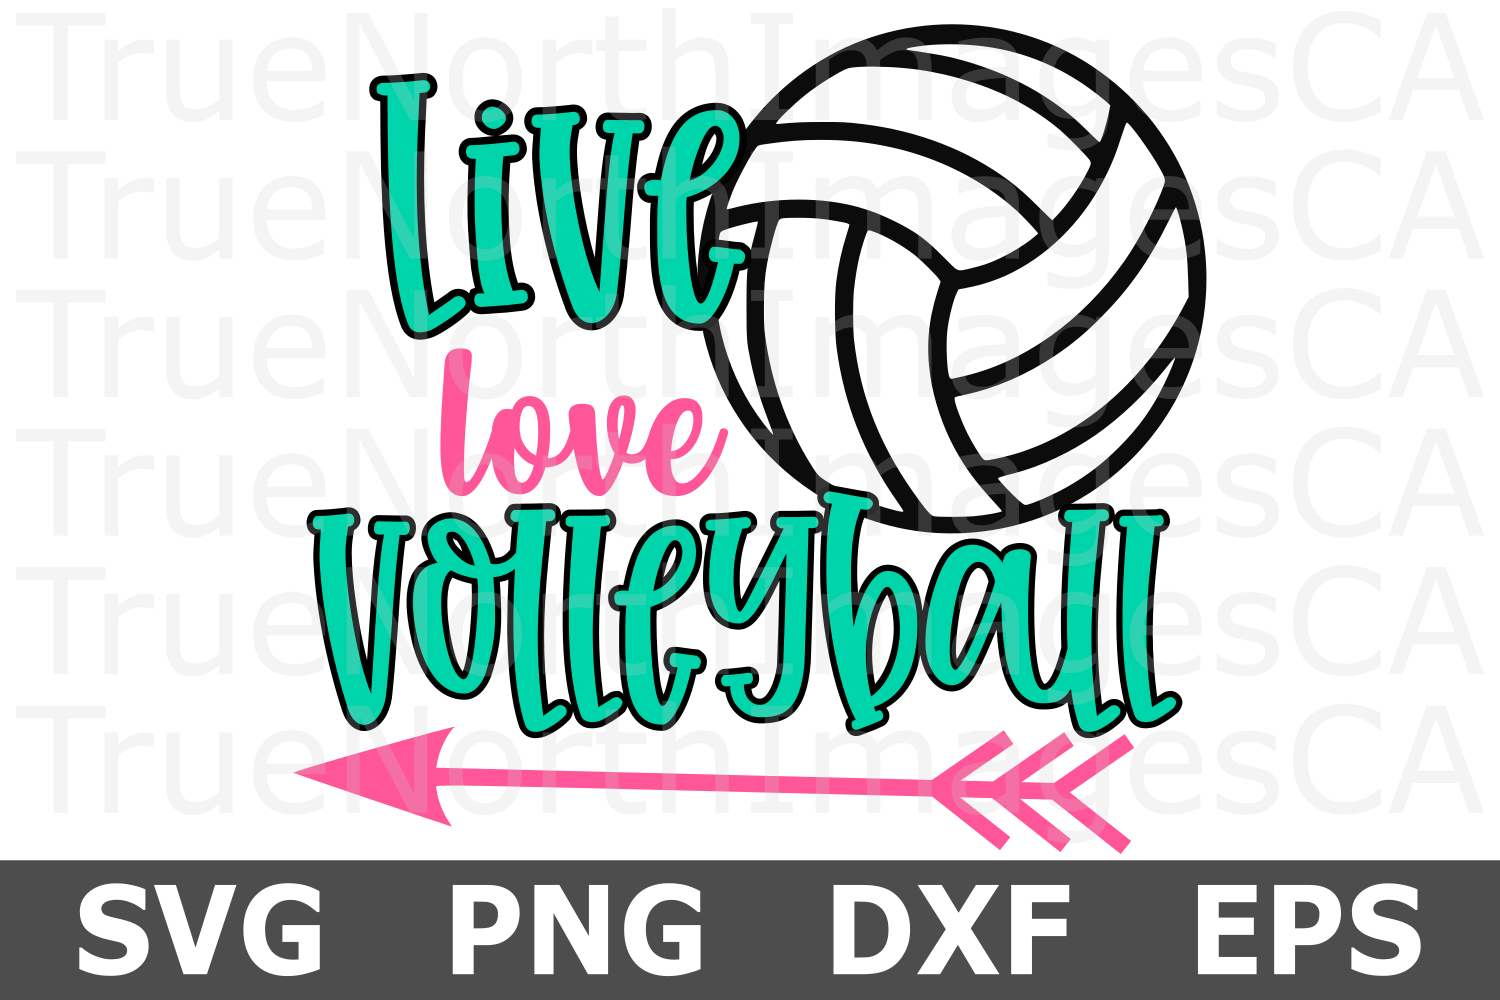 Live Love Volleyball - A Sports SVG Cut File